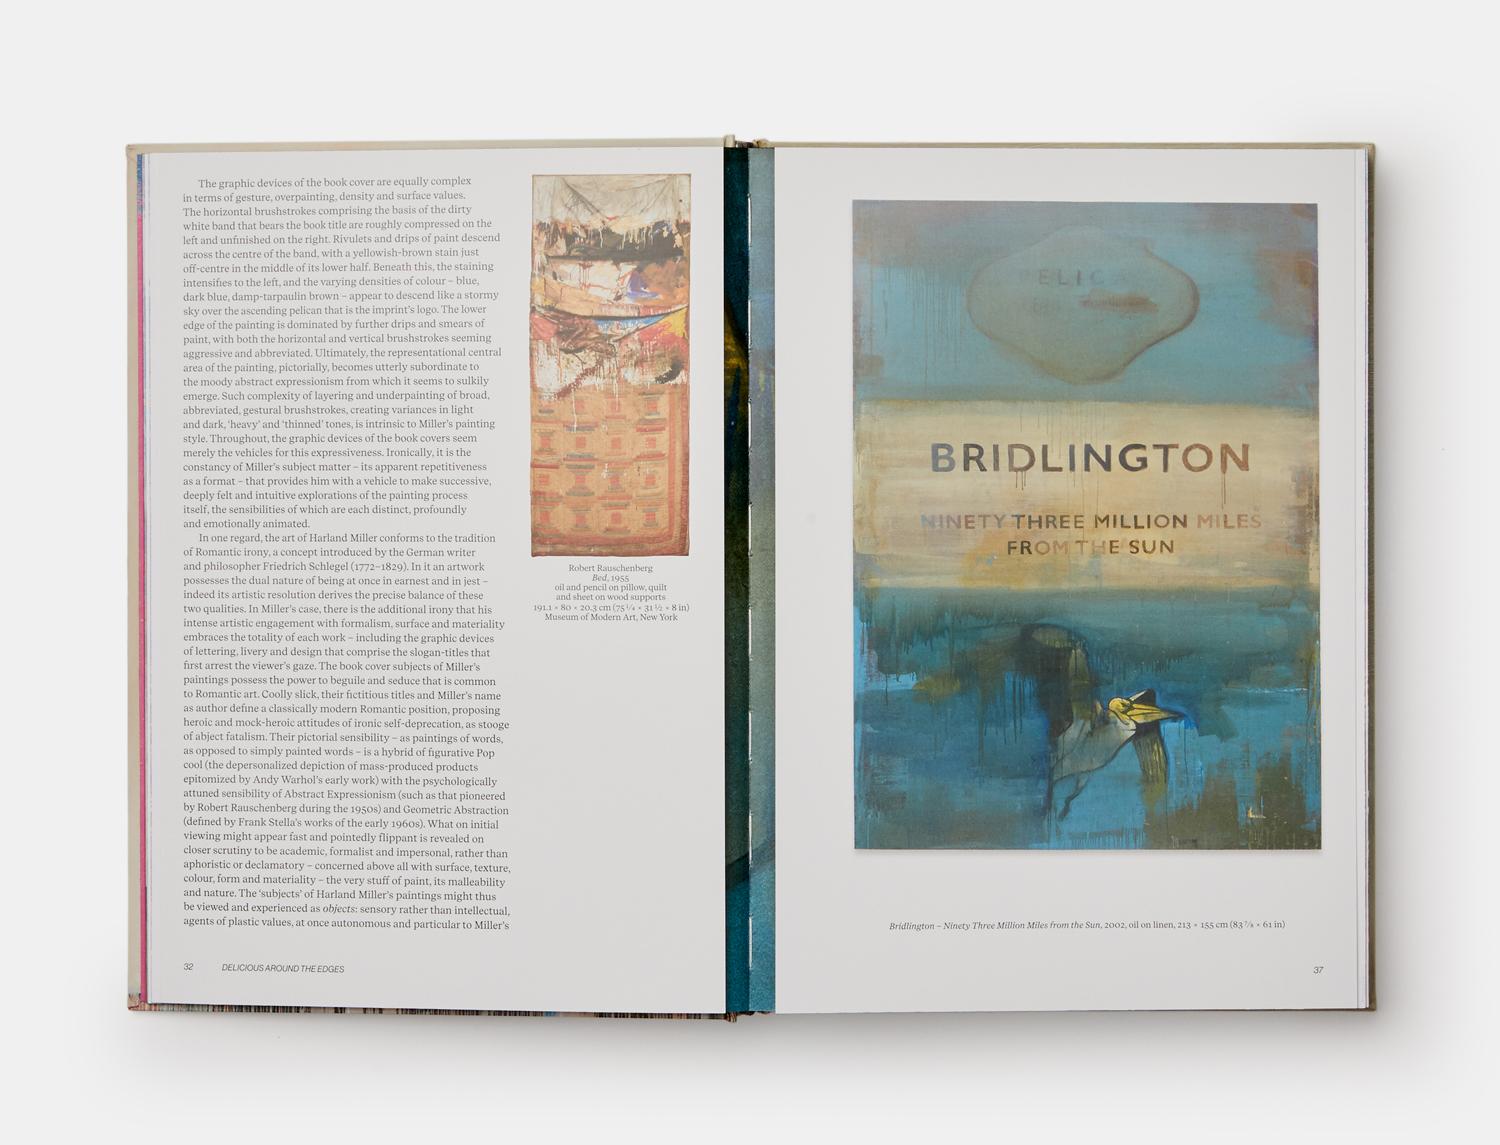 The most comprehensive monograph to date on the British artist and writer best known for his paintings based on the dust jackets of early Penguin paperbacks

This monograph covers nearly 20 years of his paintings, and features three newly